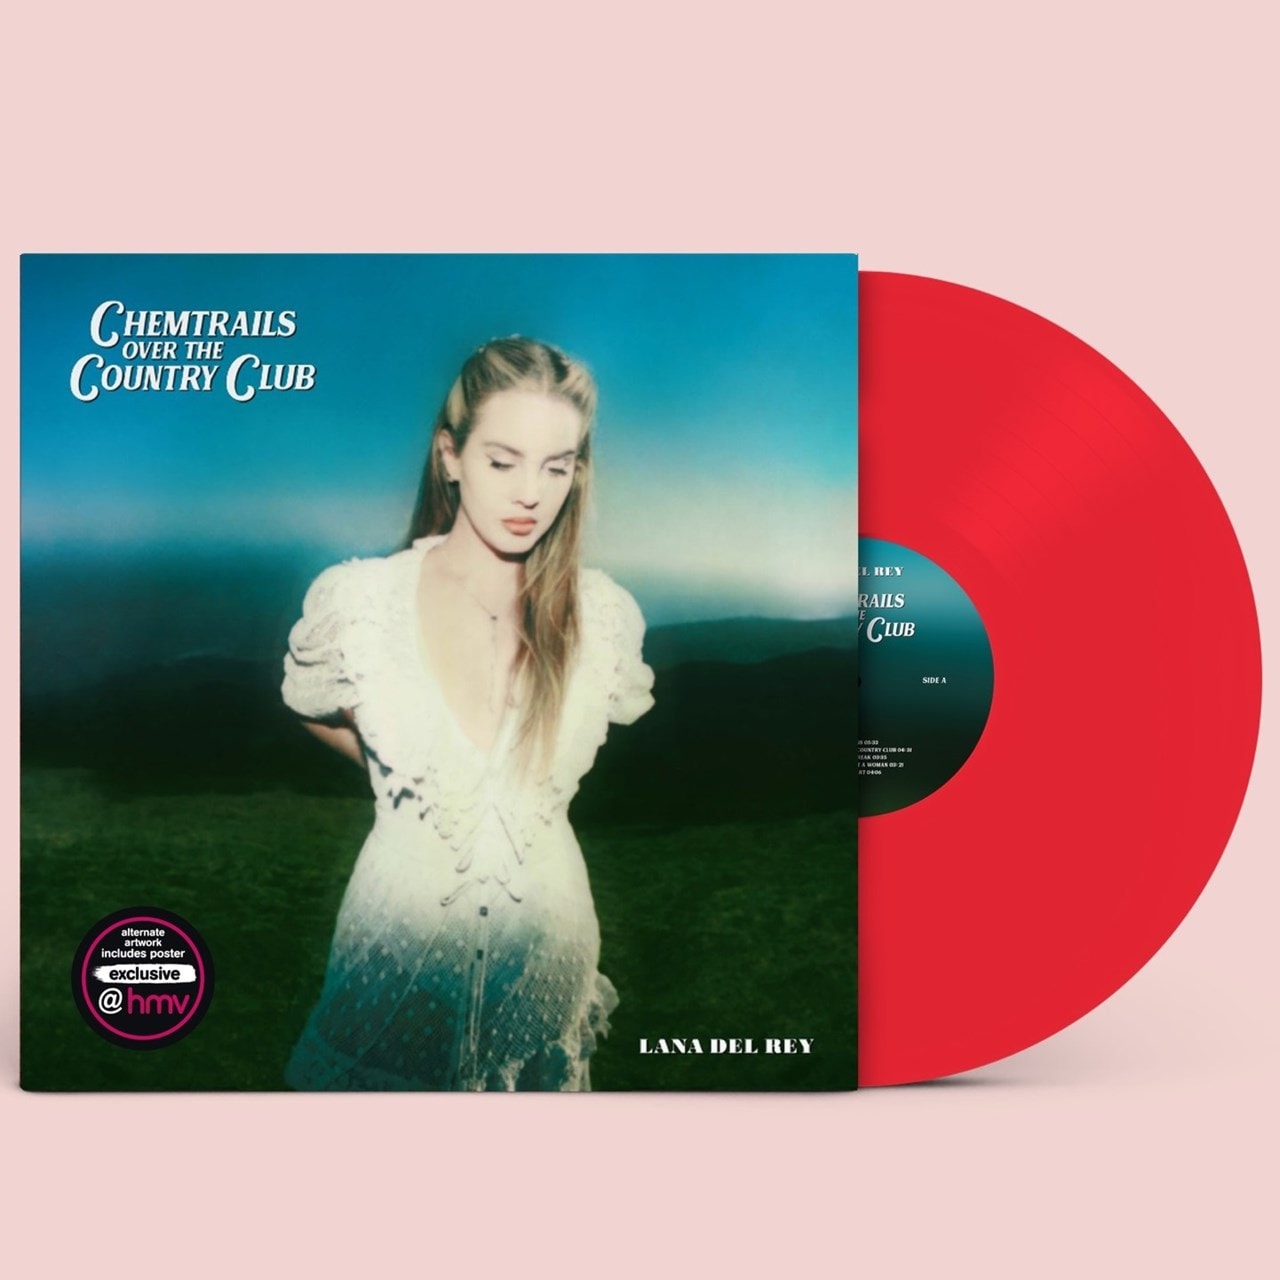 Chemtrails Over the Country Club (hmv Exclusive) Red Vinyl | Vinyl 12"  Album | Free shipping over £20 | HMV Store